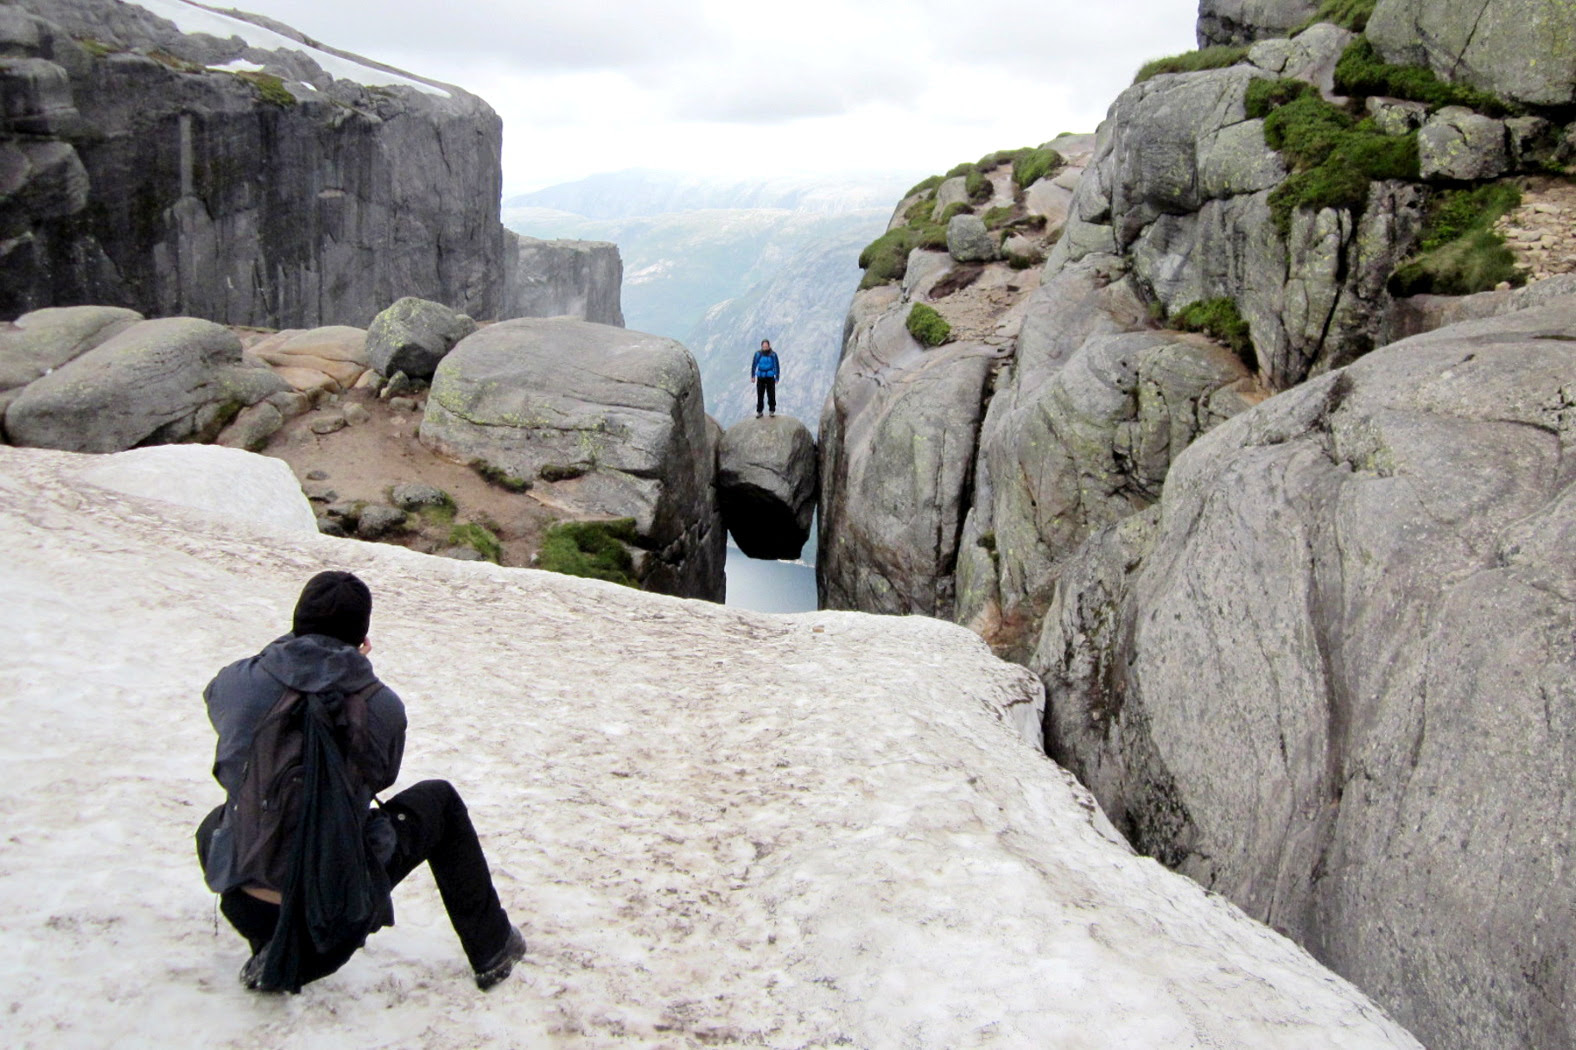 At the end of the fjord lies the tall kjerag mountain, another popular hiking destination with an iconic spherical rock that sits in a crevice along the trail. Kjerag Bolten Hoch Uber Dem Lysefjord Skandaktiv Info